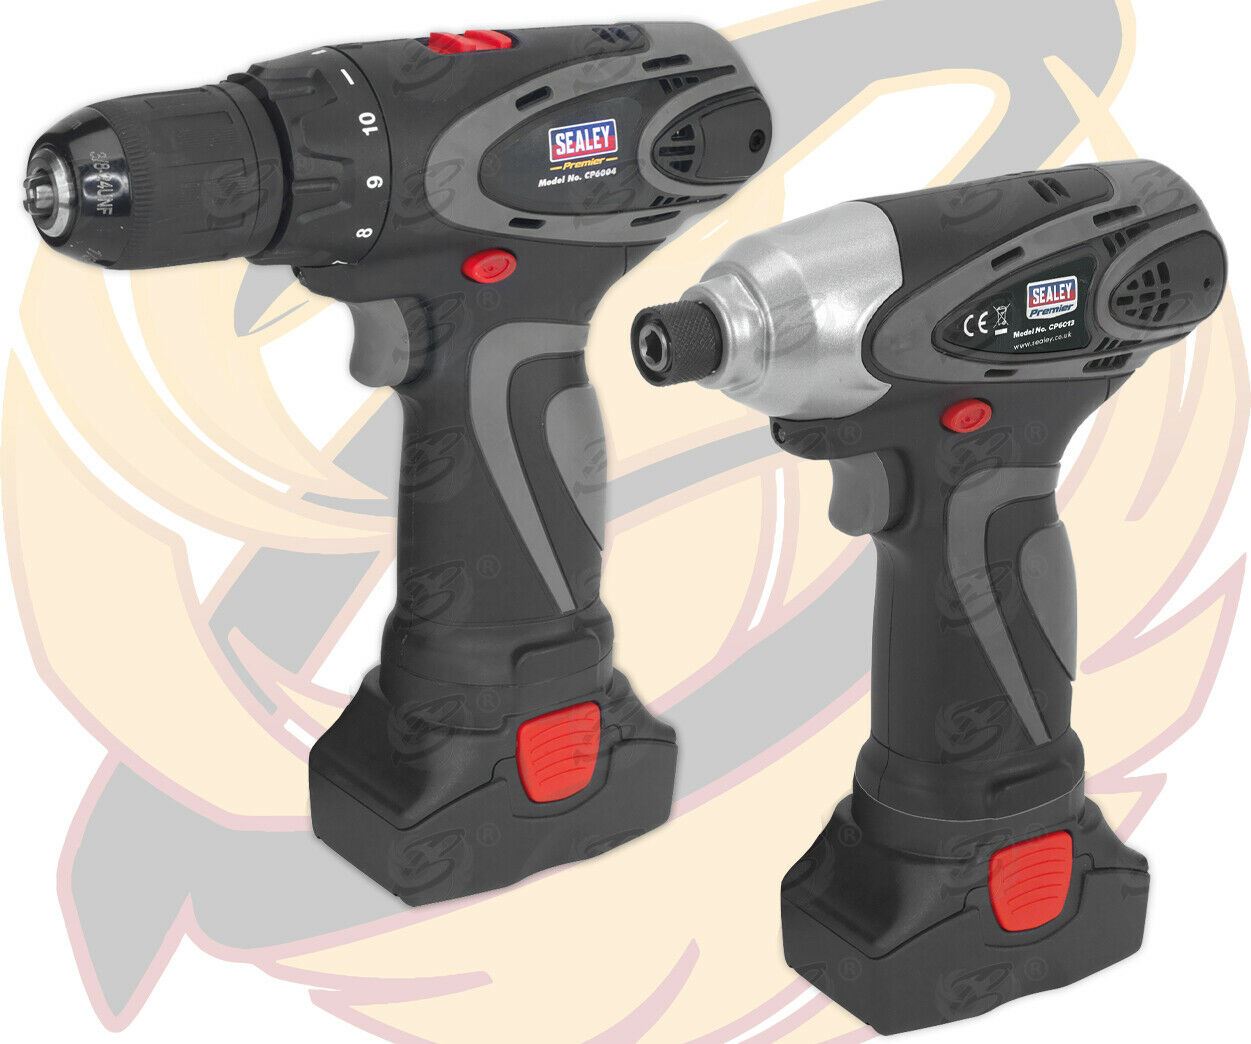 SEALEY 14.4V CORDLESS COMBO KIT DRILL & IMPACT DRIVER 117NM 2AH LITHIUM ION x2 BATTERIES